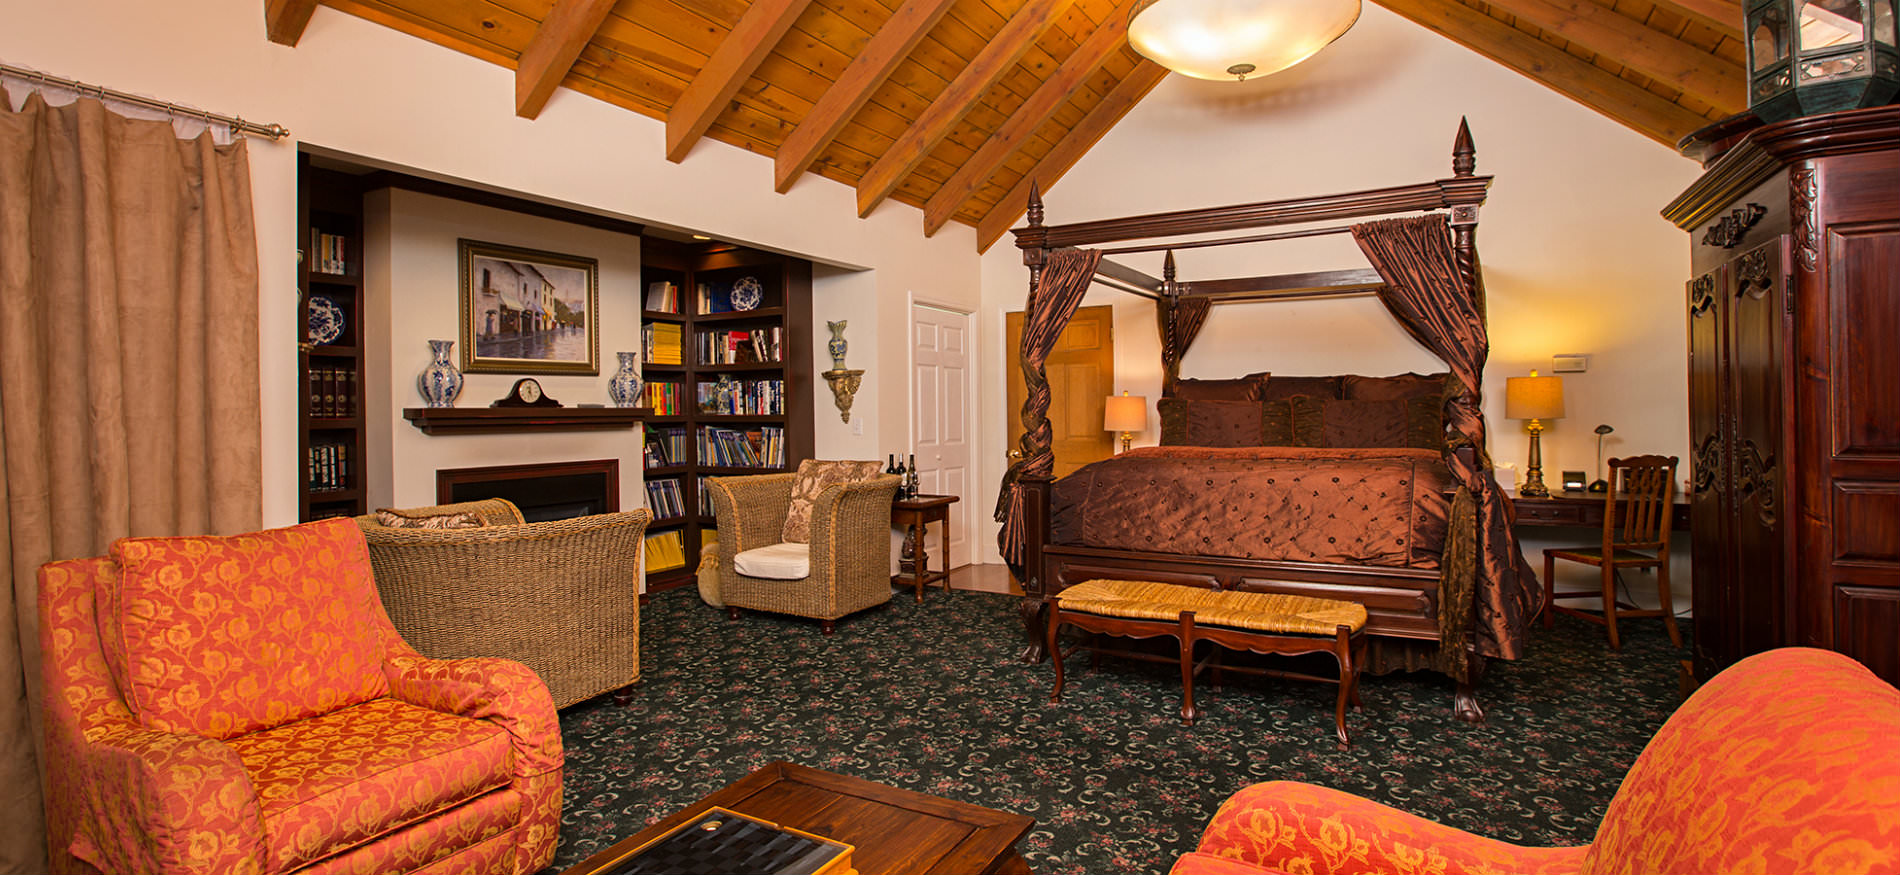 Large vaulted suite with four poster bed, bookshelves flanking fireplace with two chairs, and orange chairs with coffee table